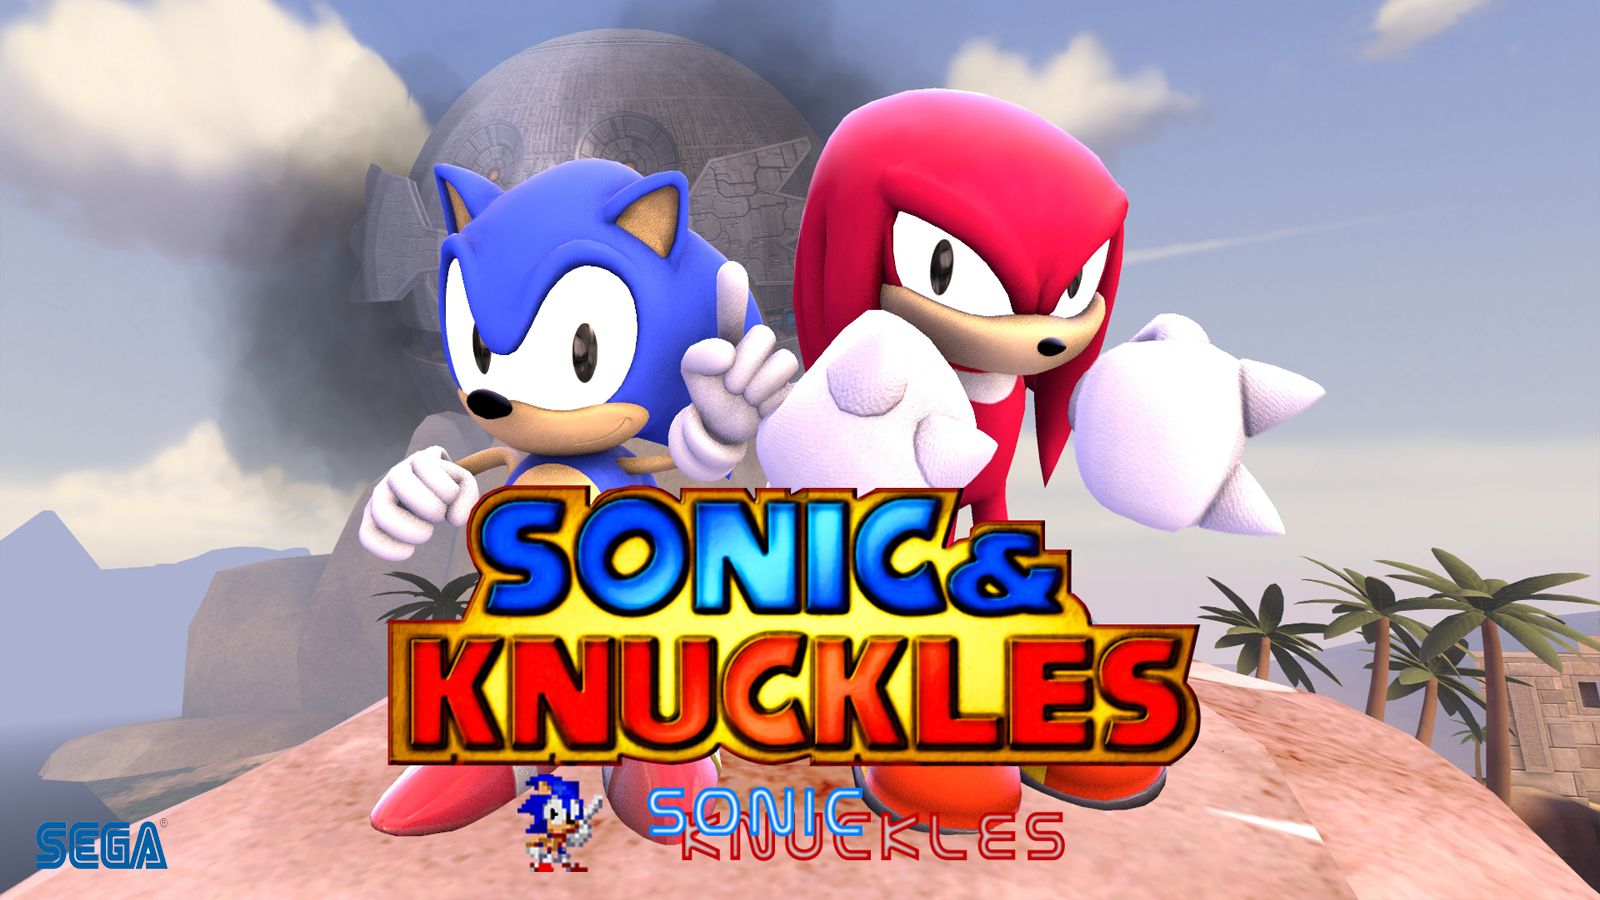 Sonic 3 and knuckles steam version фото 21